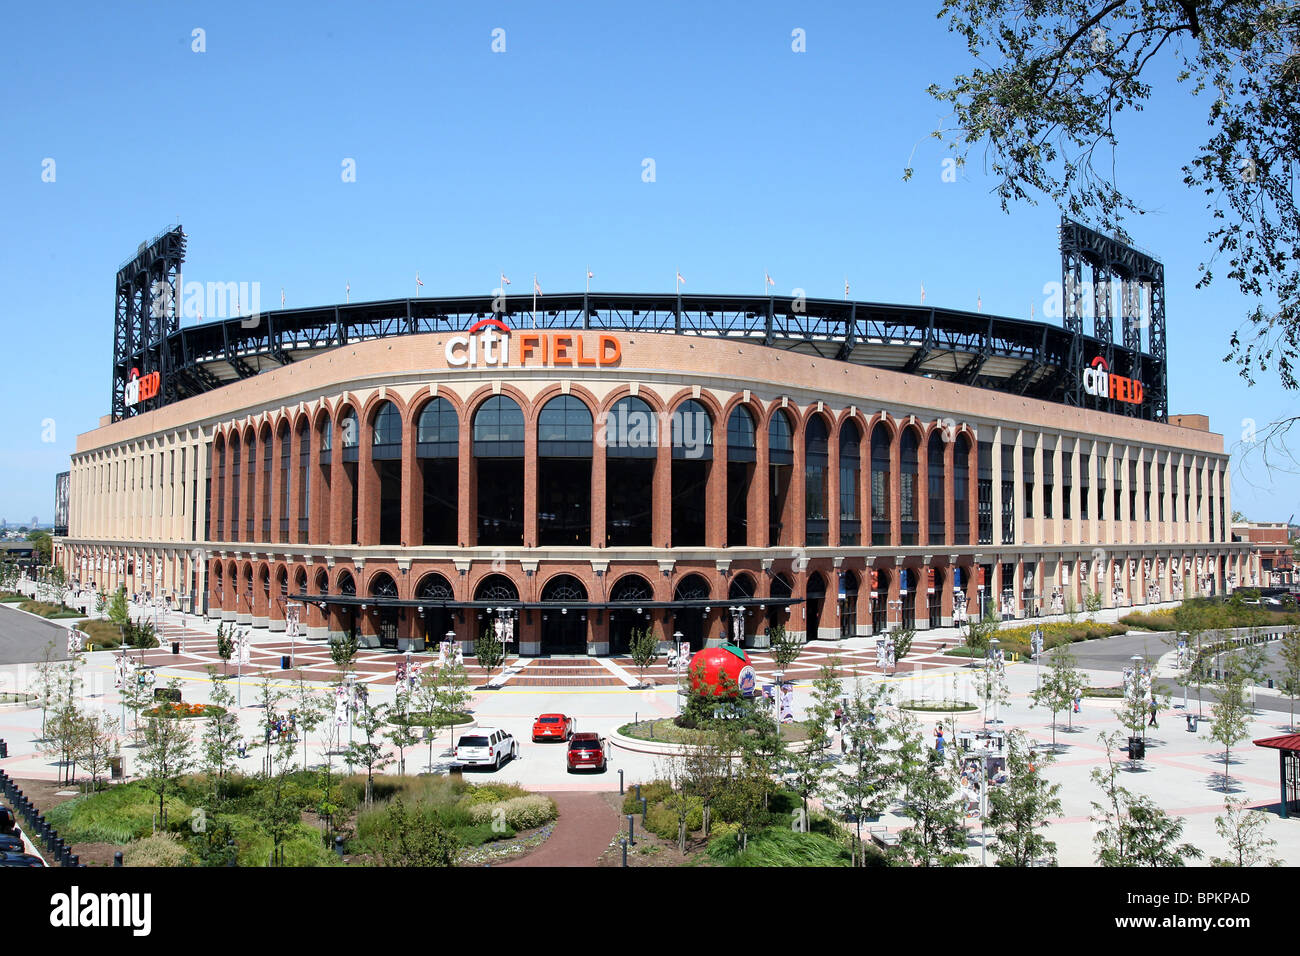 Citi Field Stadium in Queens, New York, home of the Mets baseball team, completed in 2009 as a replacement for Shea Stadium. Stock Photo